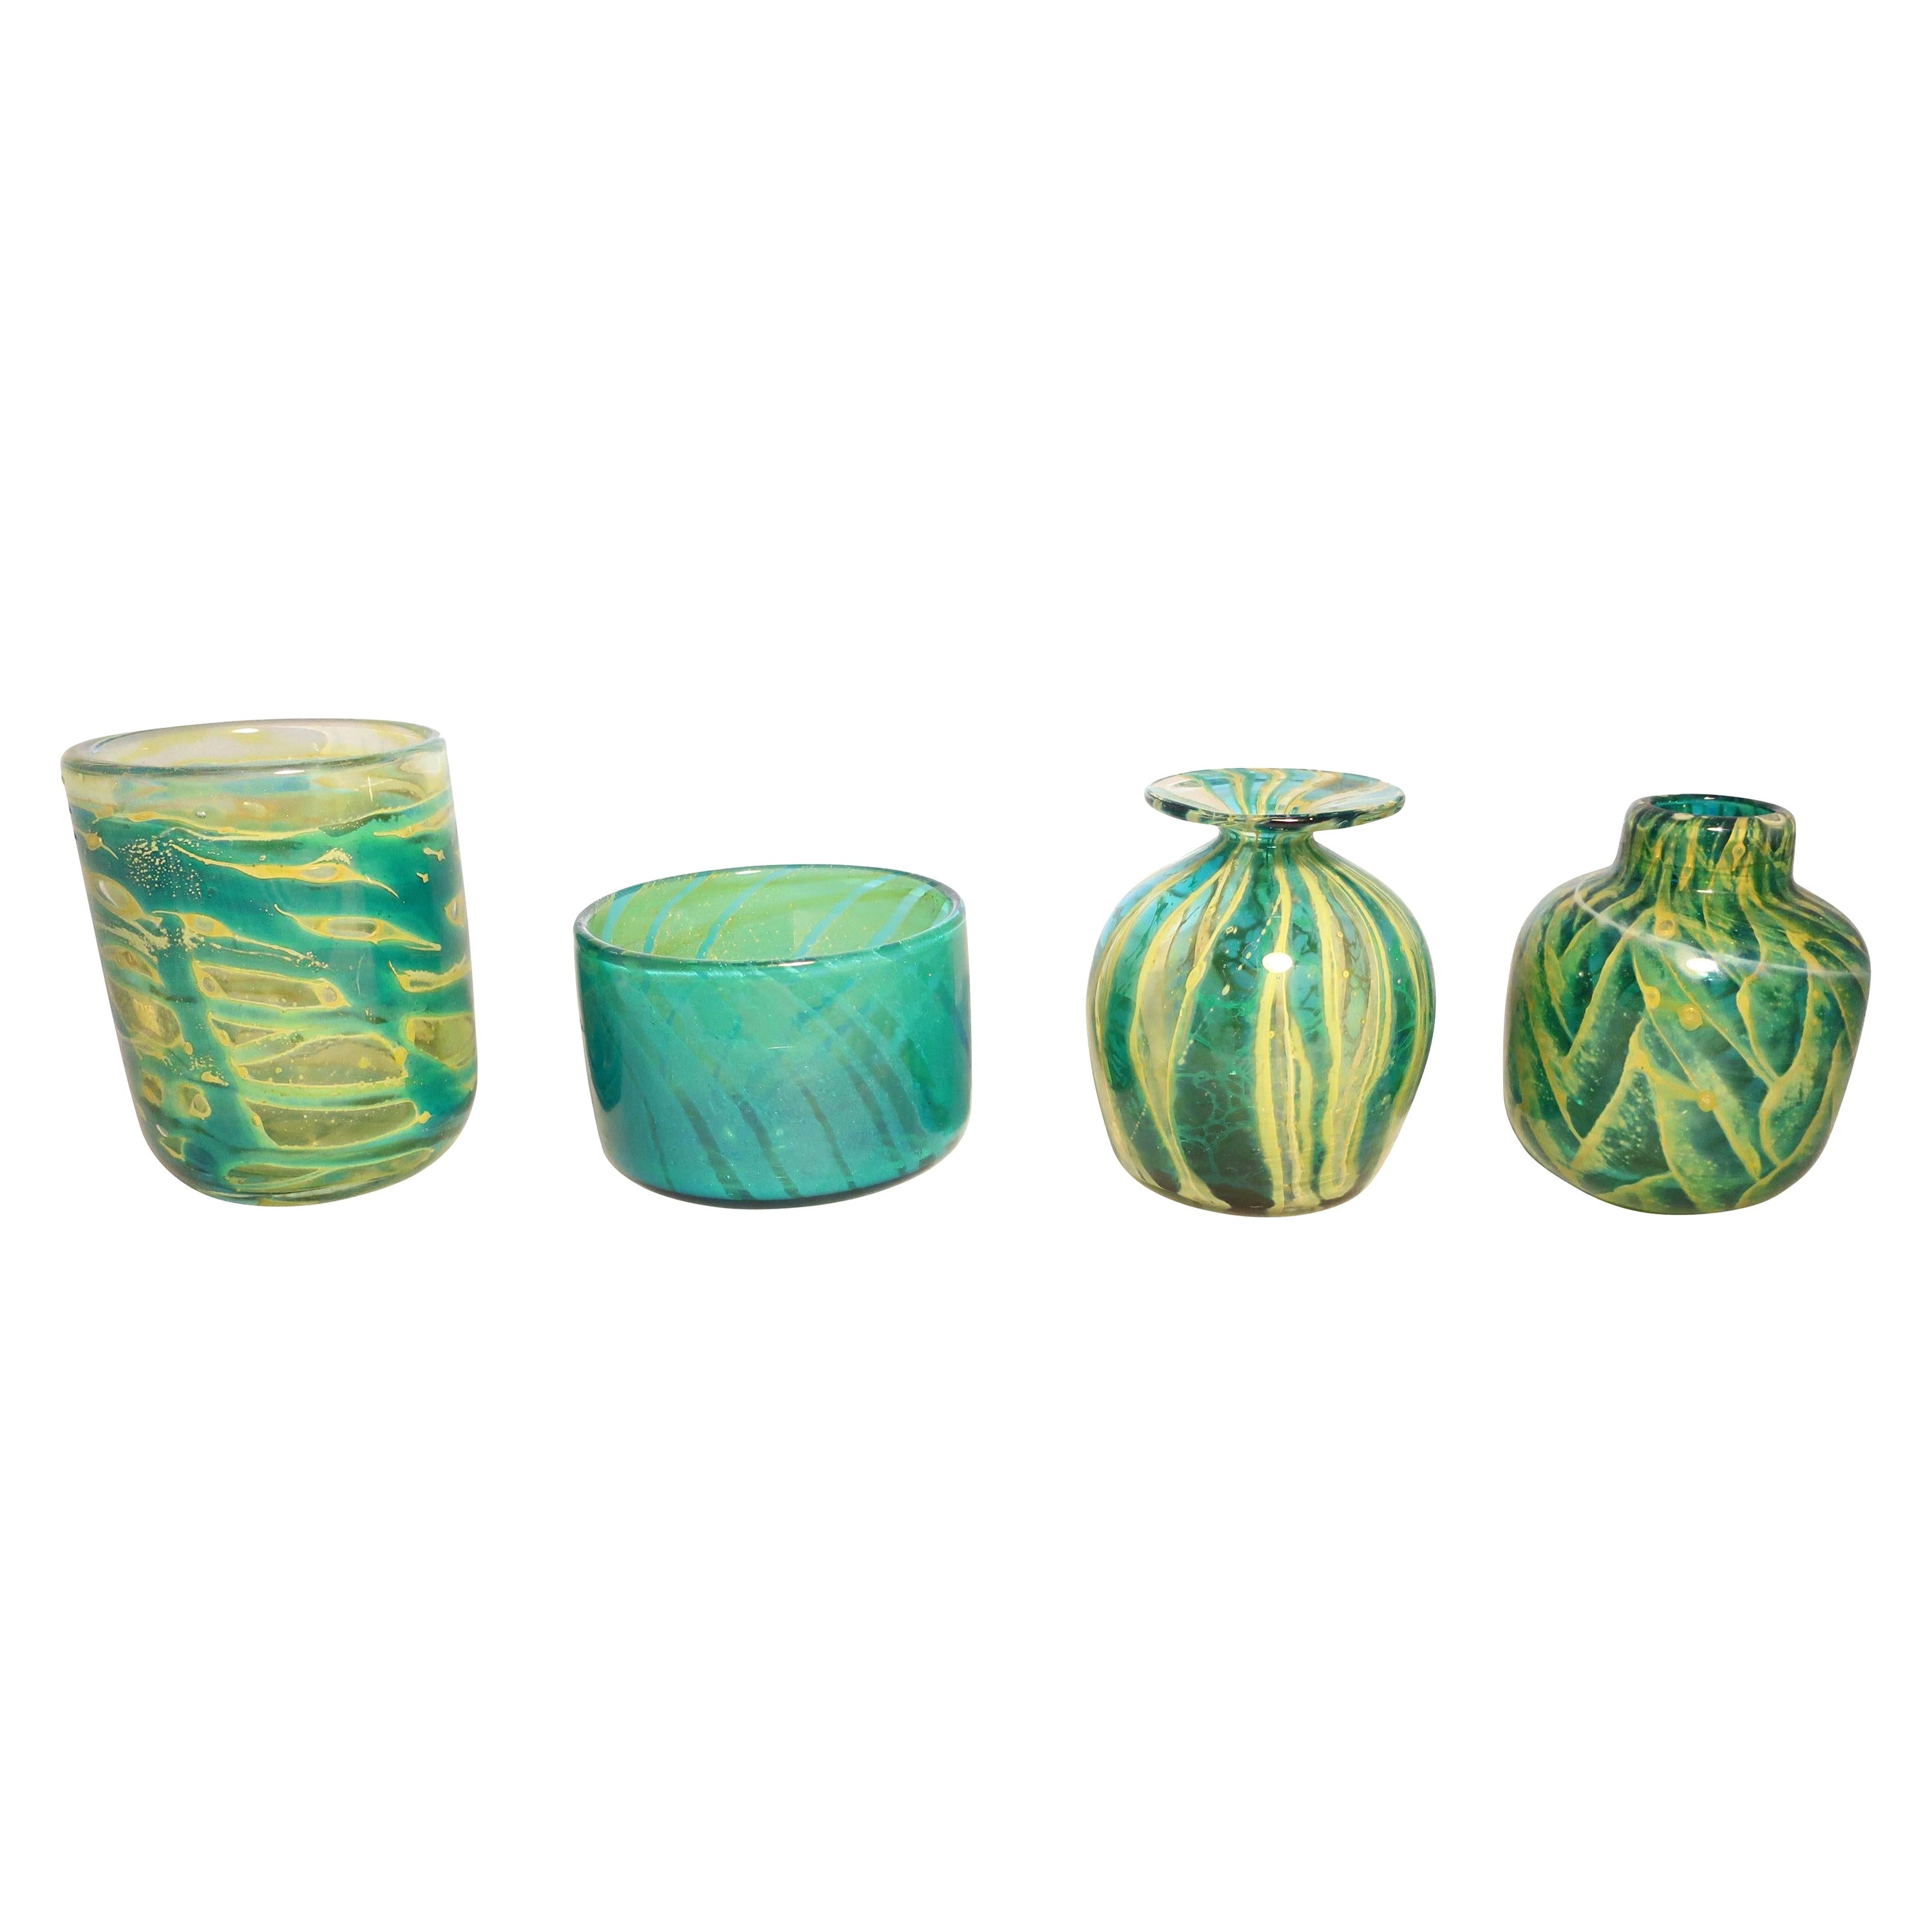 Mdina Glass Vases and Bowl from Malta, circa 1960 For Sale